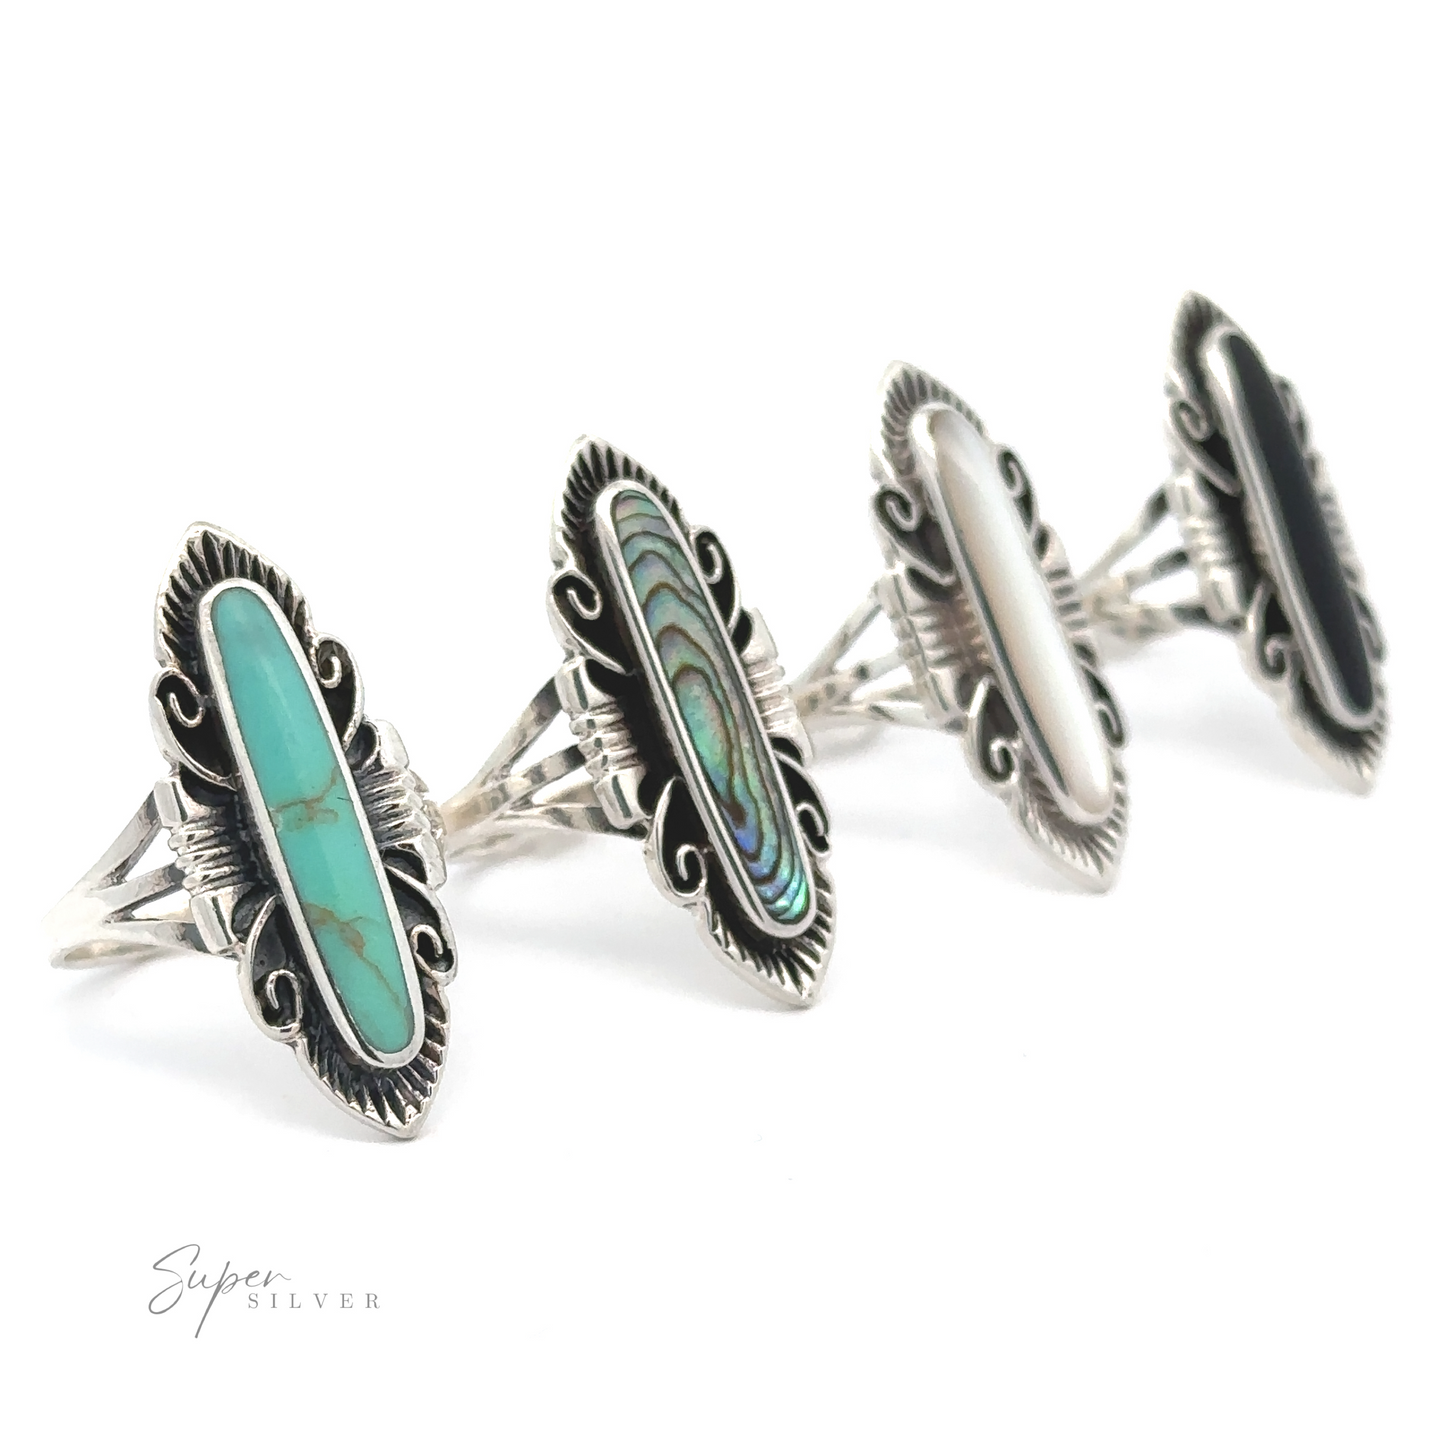 Four Elegant Southwest Inspired Rings with Inlaid Stone, featuring a Southwestern-inspired design.